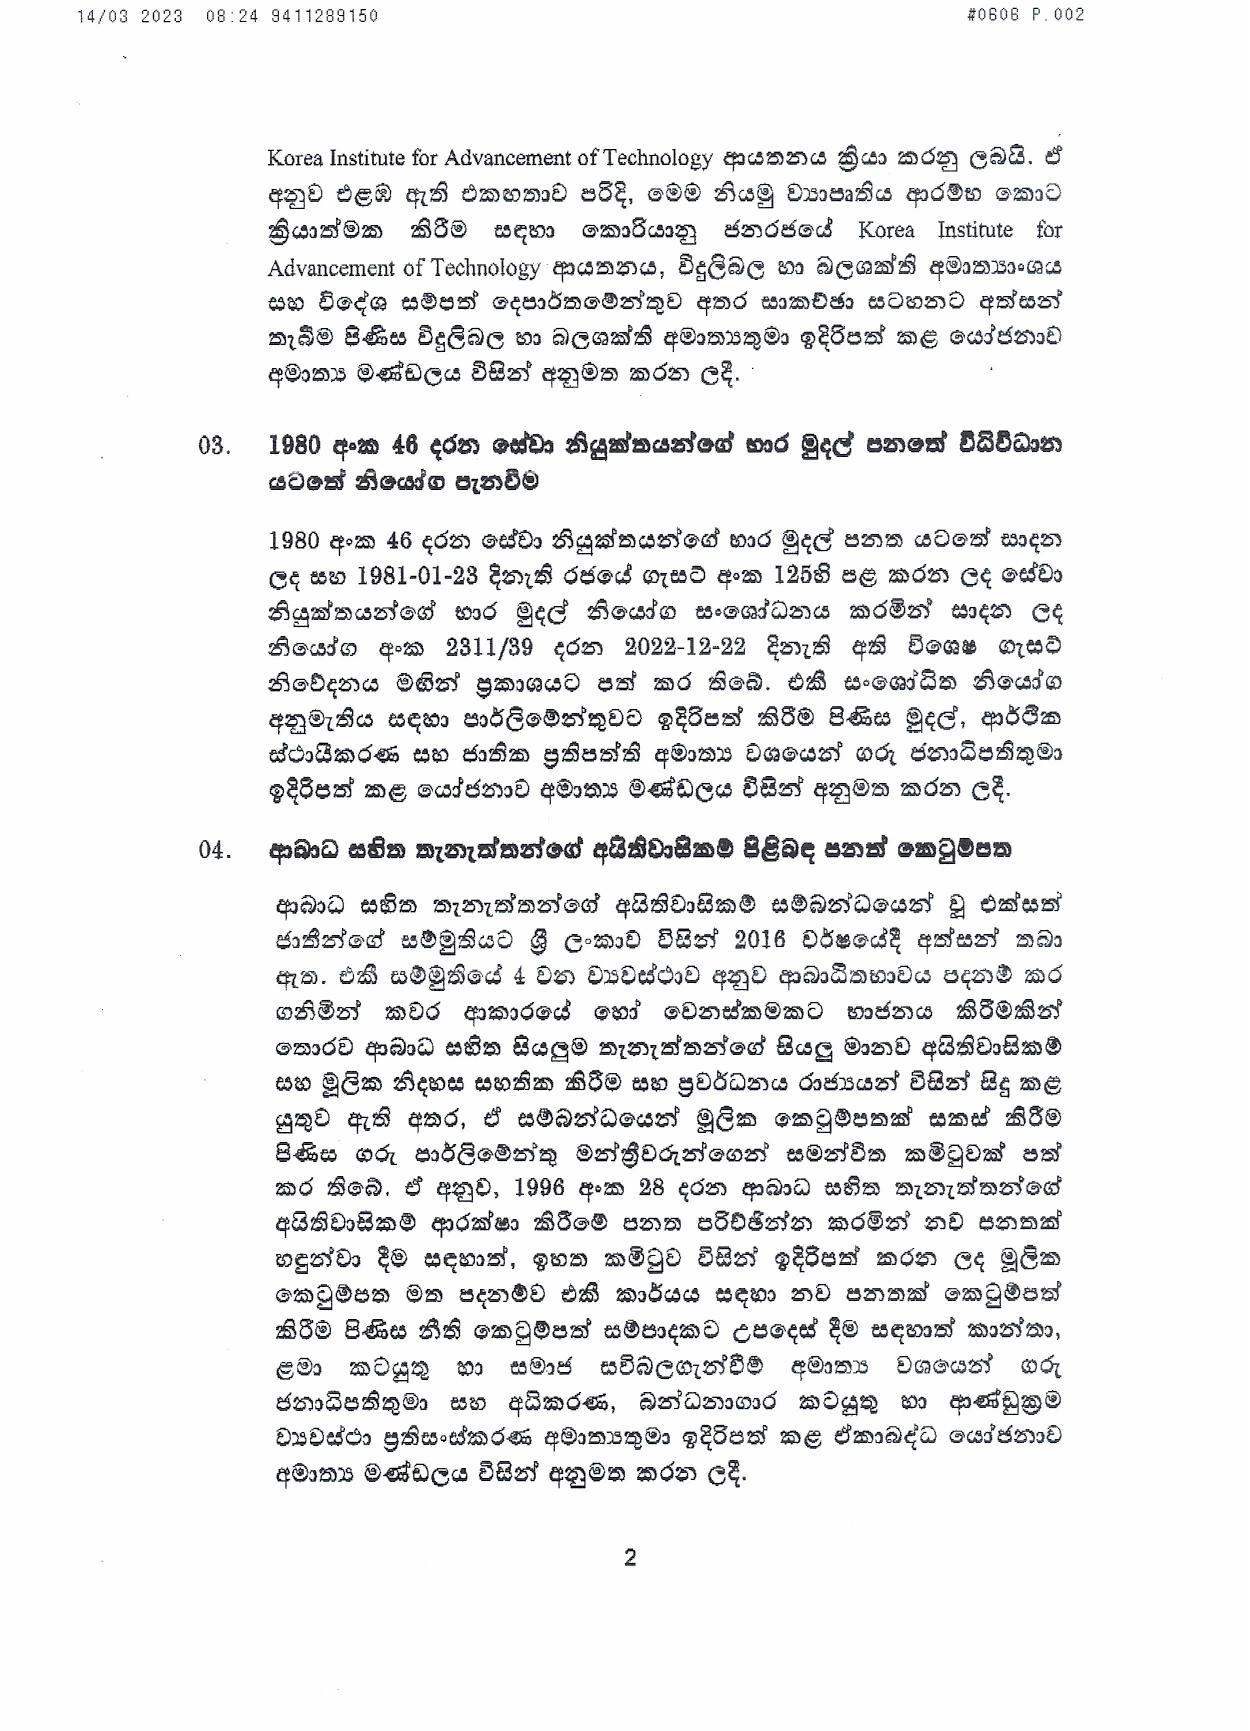 Cabinet Decision on 13.03.2023 page 002